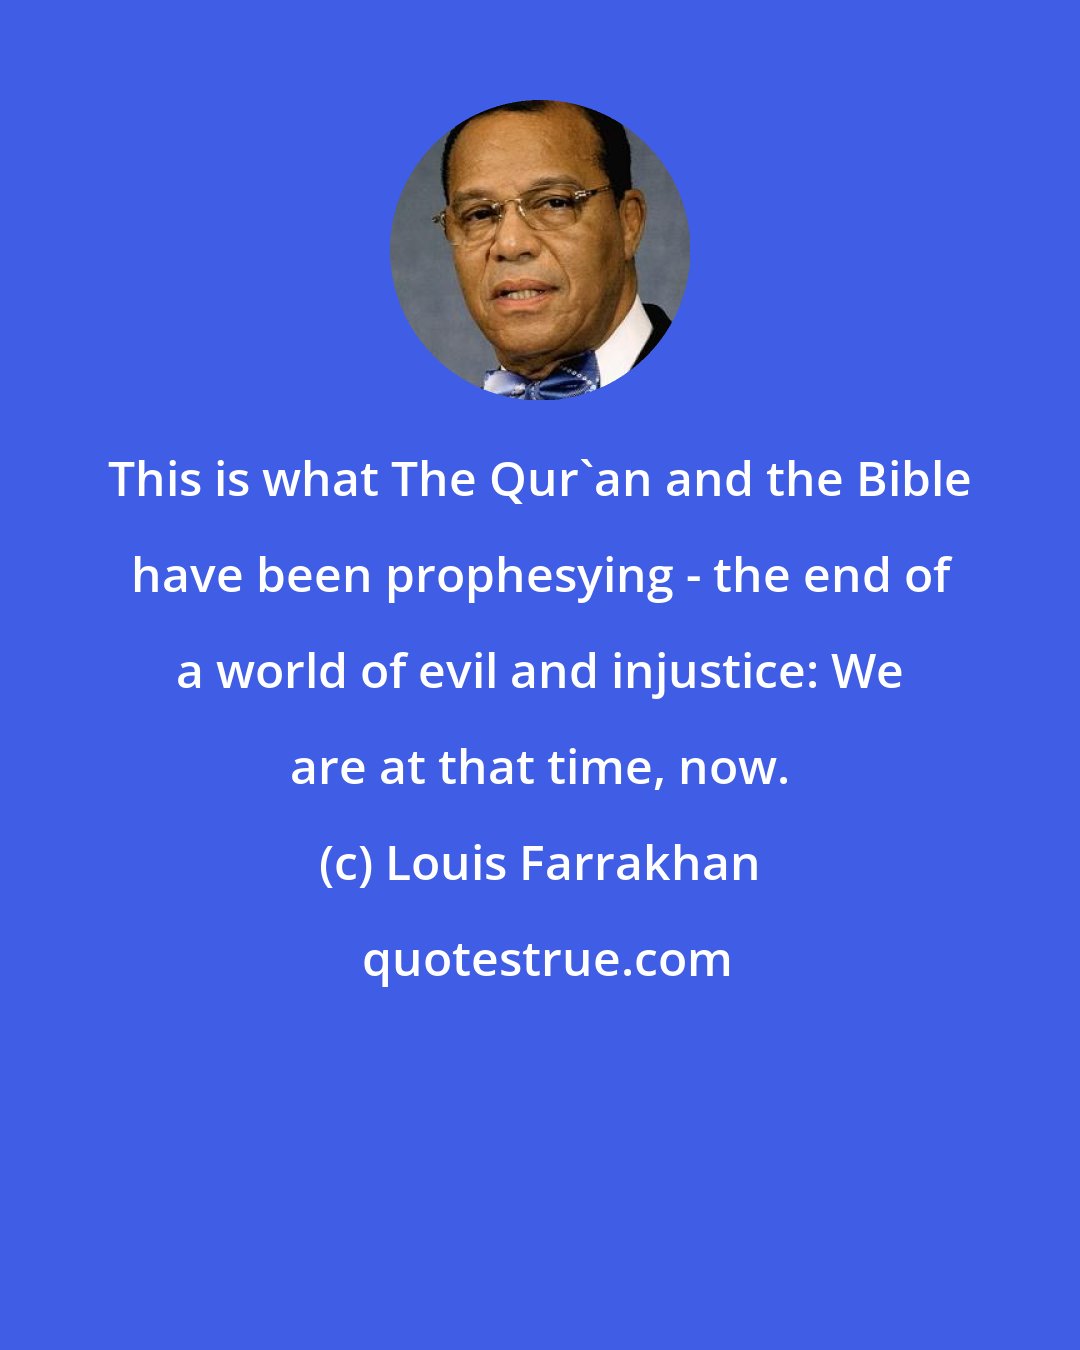 Louis Farrakhan: This is what The Qur'an and the Bible have been prophesying - the end of a world of evil and injustice: We are at that time, now.